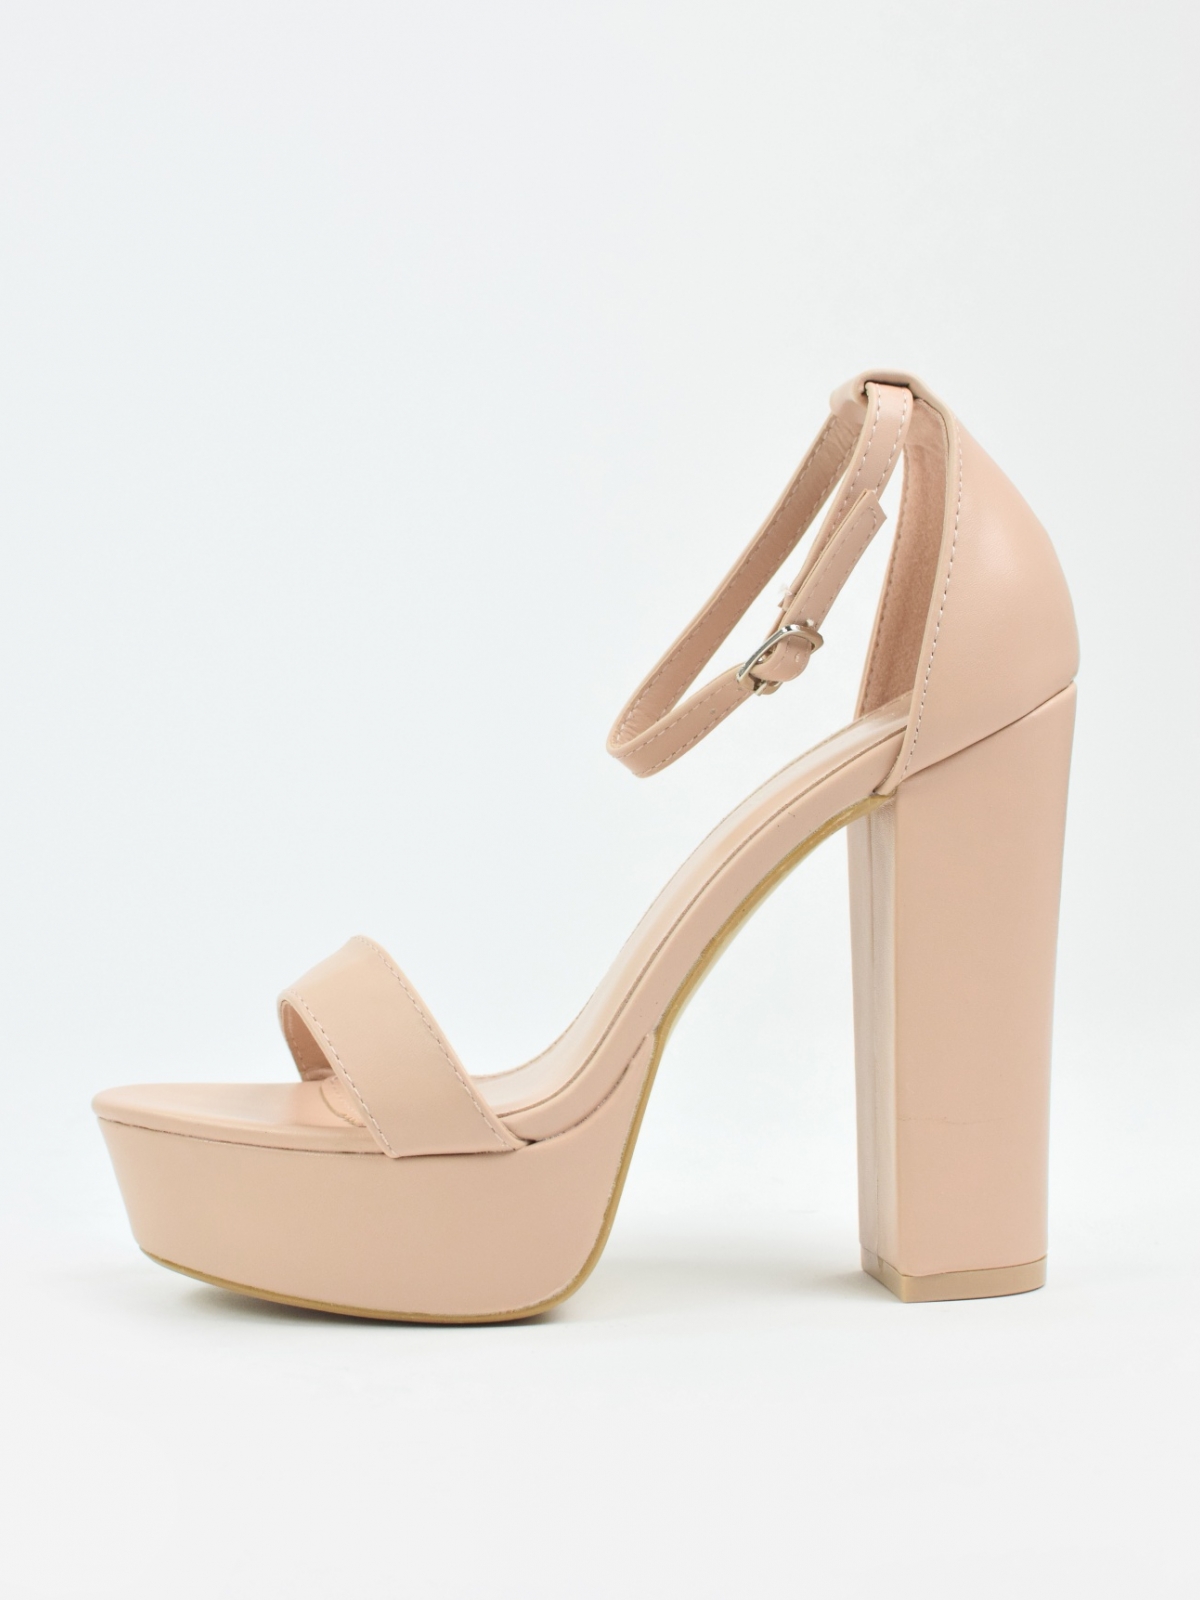 Stylish high heeled sandals with stable thick heel in beige